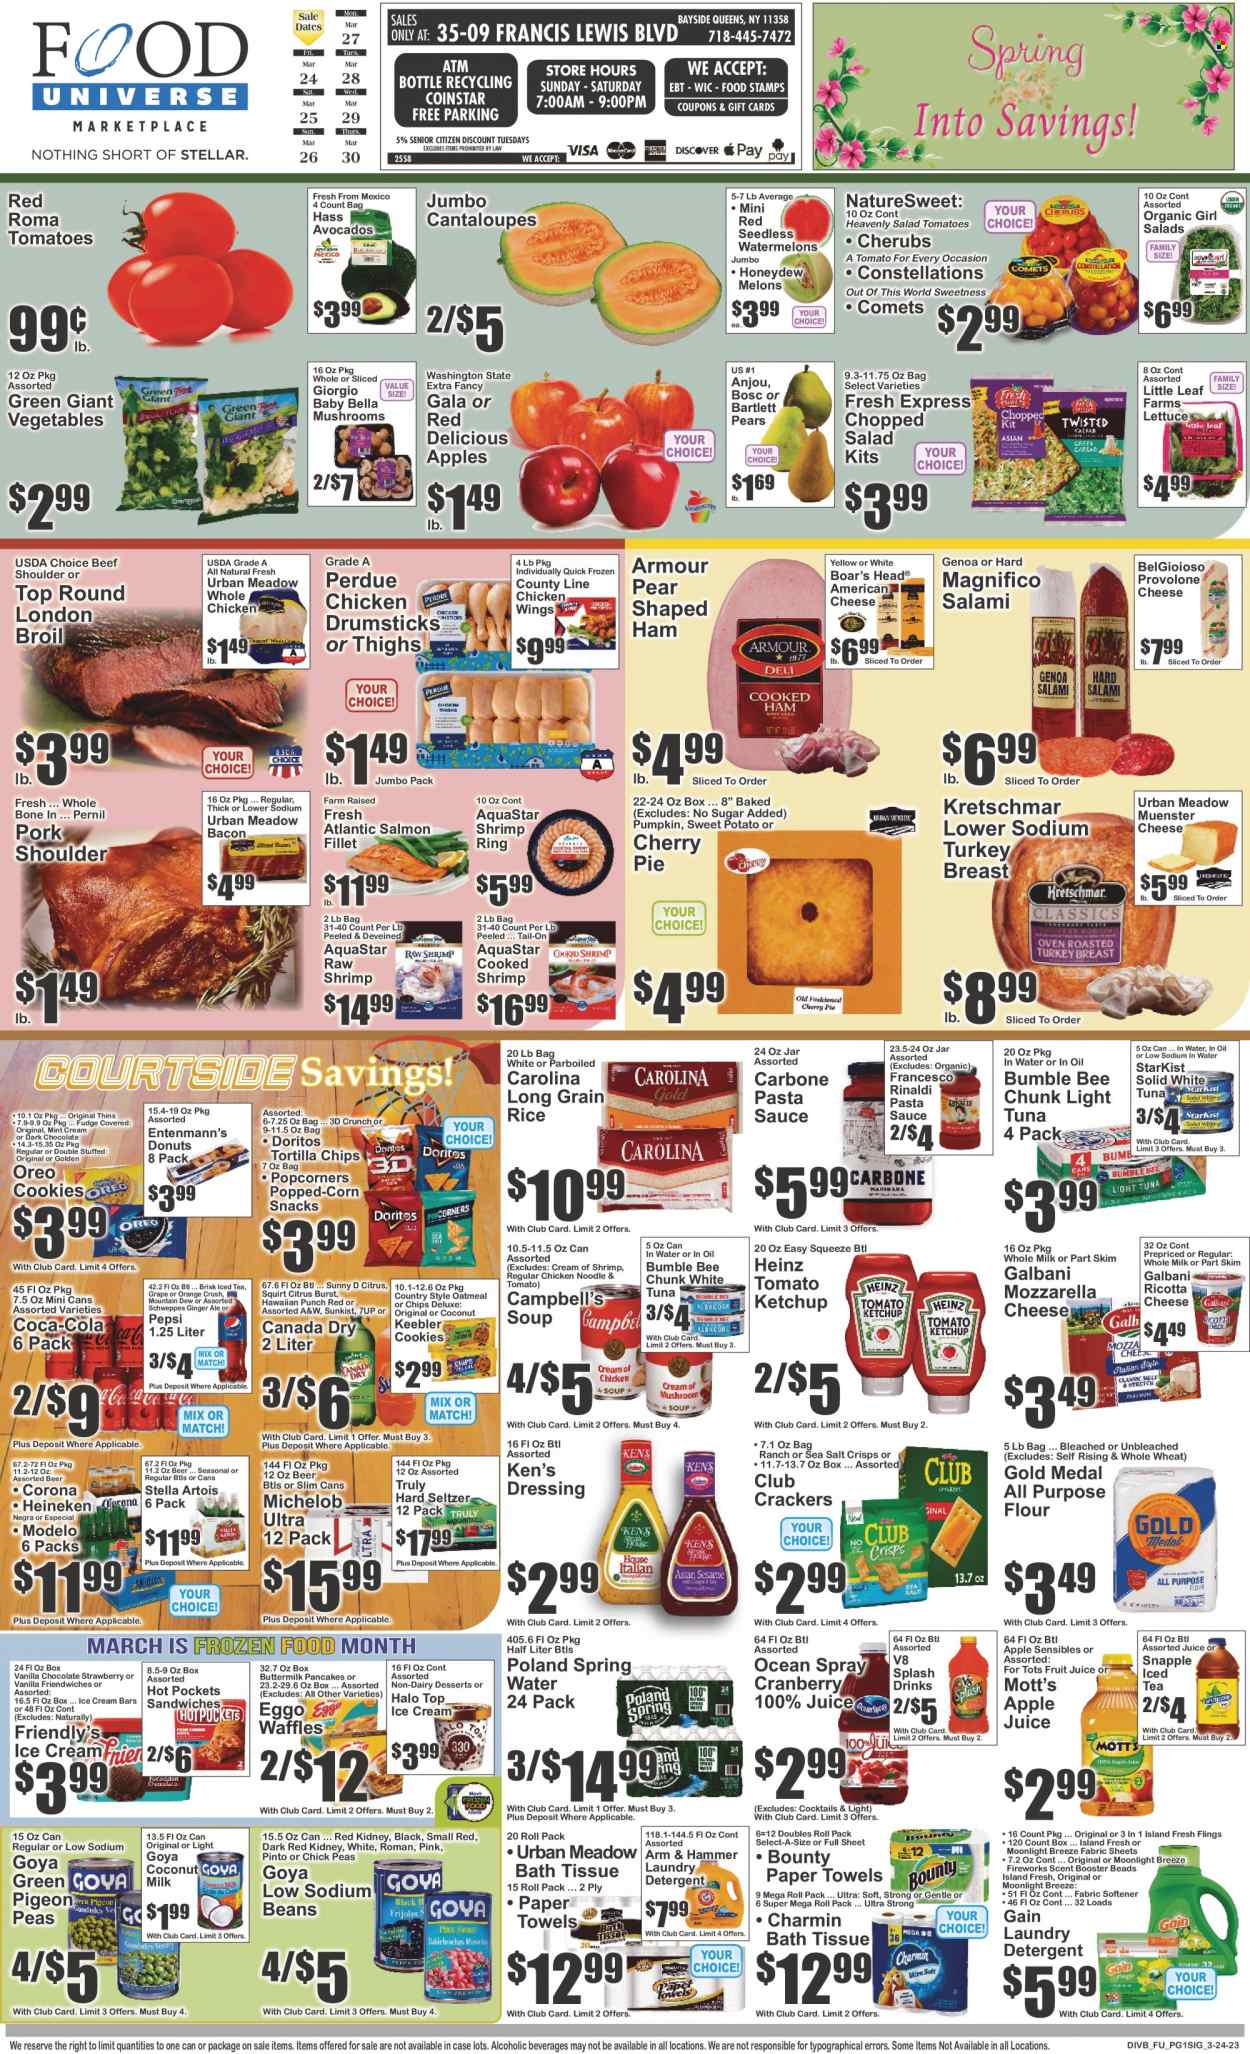 thumbnail - Food Universe Flyer - 03/24/2023 - 03/30/2023 - Sales products - mushrooms, donut, waffles, Entenmann's, cherry pie, beans, cantaloupe, sweet potato, tomatoes, peas, lettuce, salad, chopped salad, avocado, Bartlett pears, Gala, Red Delicious apples, honeydew, cherries, oranges, Mott's, salmon, salmon fillet, tuna, shrimps, StarKist, Campbell's, hot pocket, pasta sauce, sandwich, soup, Bumble Bee, sauce, noodles, Perdue®, bacon, salami, ham, american cheese, mozzarella, ricotta, Münster cheese, Galbani, Provolone, Oreo, ice cream, ice cream bars, Friendly's Ice Cream, chicken wings, cookies, fudge, snack, Bounty, crackers, Keebler, Doritos, tortilla chips, Thins, popcorn, all purpose flour, ARM & HAMMER, oatmeal, coconut milk, Heinz, light tuna, Goya, rice, toor dal, long grain rice, ketchup, dressing, apple juice, Canada Dry, ginger ale, Mountain Dew, Schweppes, Pepsi, juice, fruit juice, ice tea, 7UP, Snapple, A&W, spring water, water, Hard Seltzer, TRULY, beer, Stella Artois, Corona Extra, Heineken, Modelo, whole chicken, chicken drumsticks, chicken, pork meat, pork shoulder, bath tissue, kitchen towels, paper towels, Charmin, detergent, Gain, fabric softener, laundry detergent, Pigeon, melons, Michelob. Page 1.